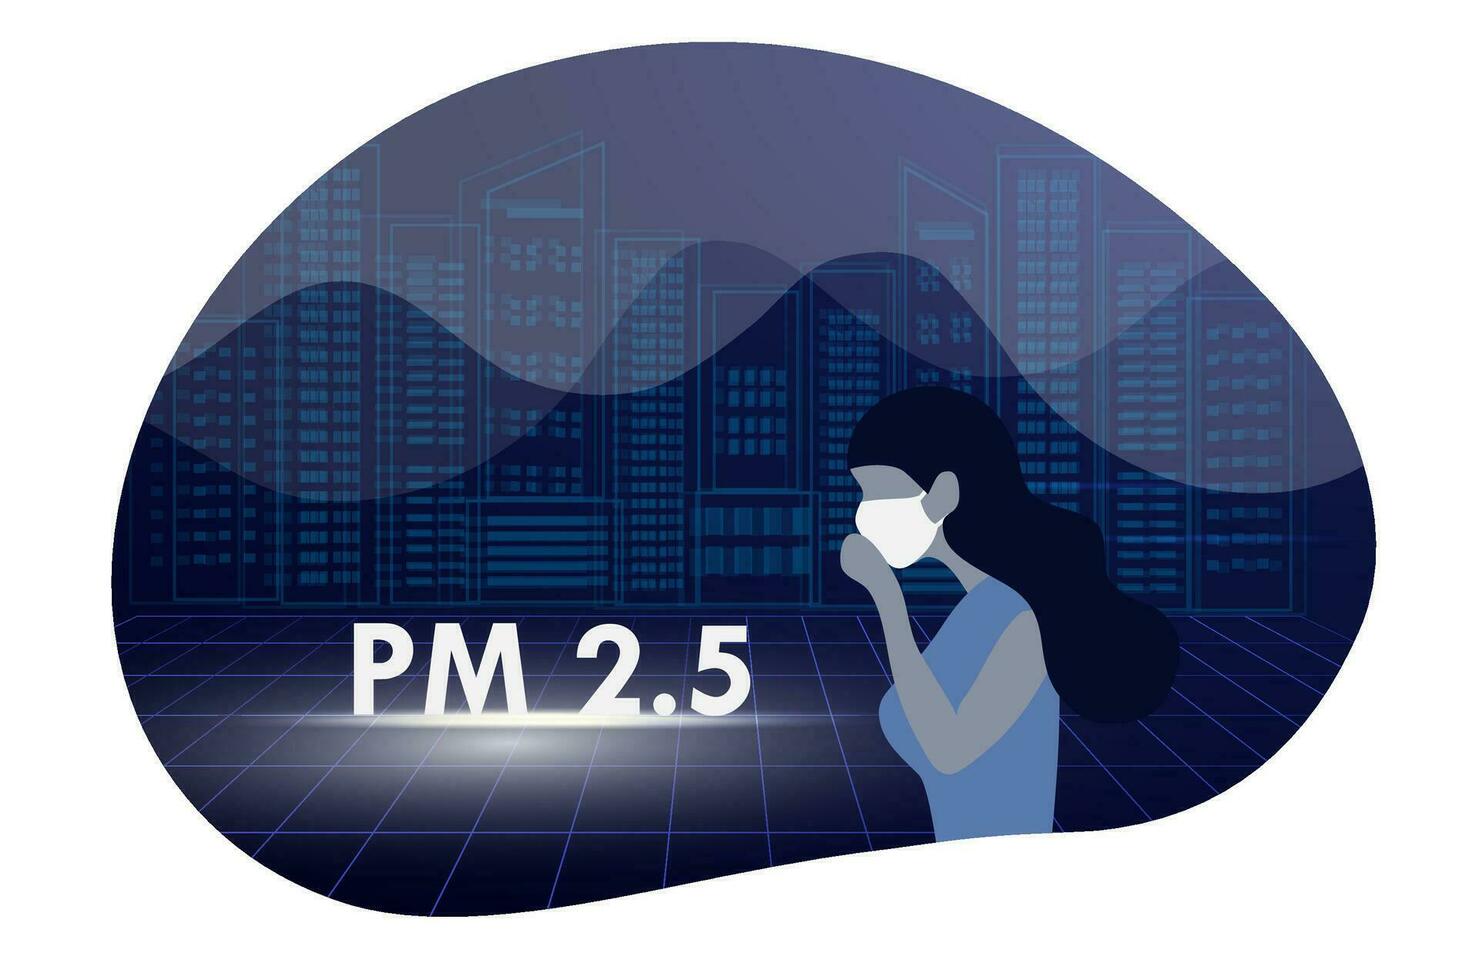 Woman wearing face masks to protect smoke, pm 2.5, dust and air poll wearing face masks tor protect smoke, pm 2.5, dust and air pollution in city, factory pipes and industrial smog vector illustration